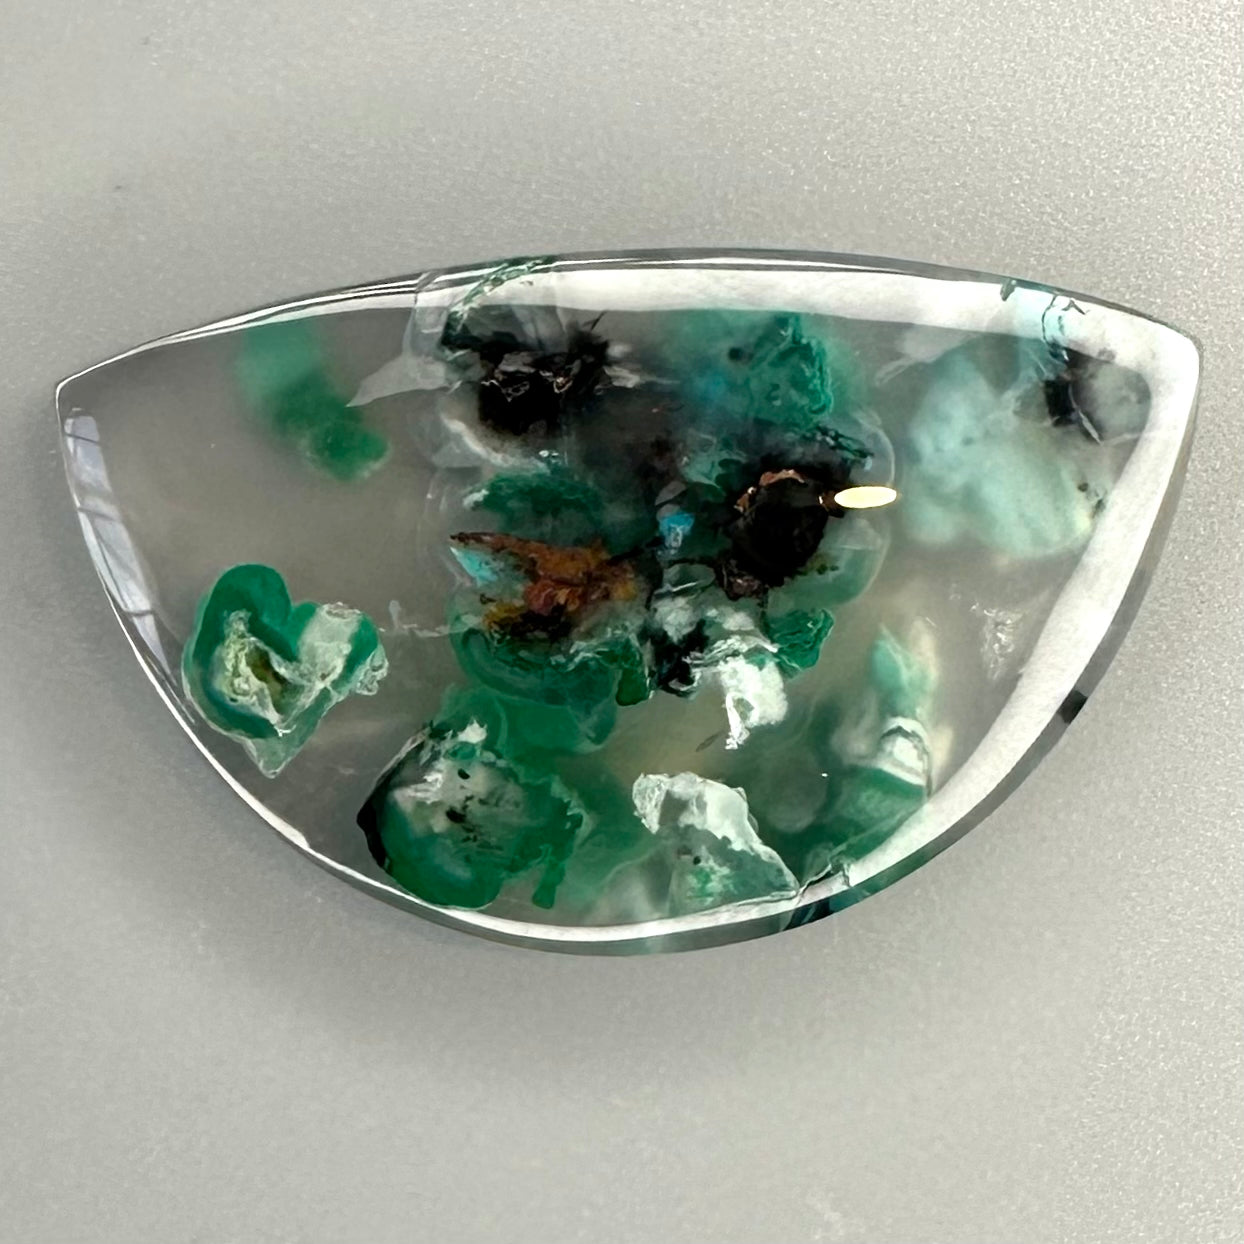 Obi Agate with Chrysocolla and Copper inclusions